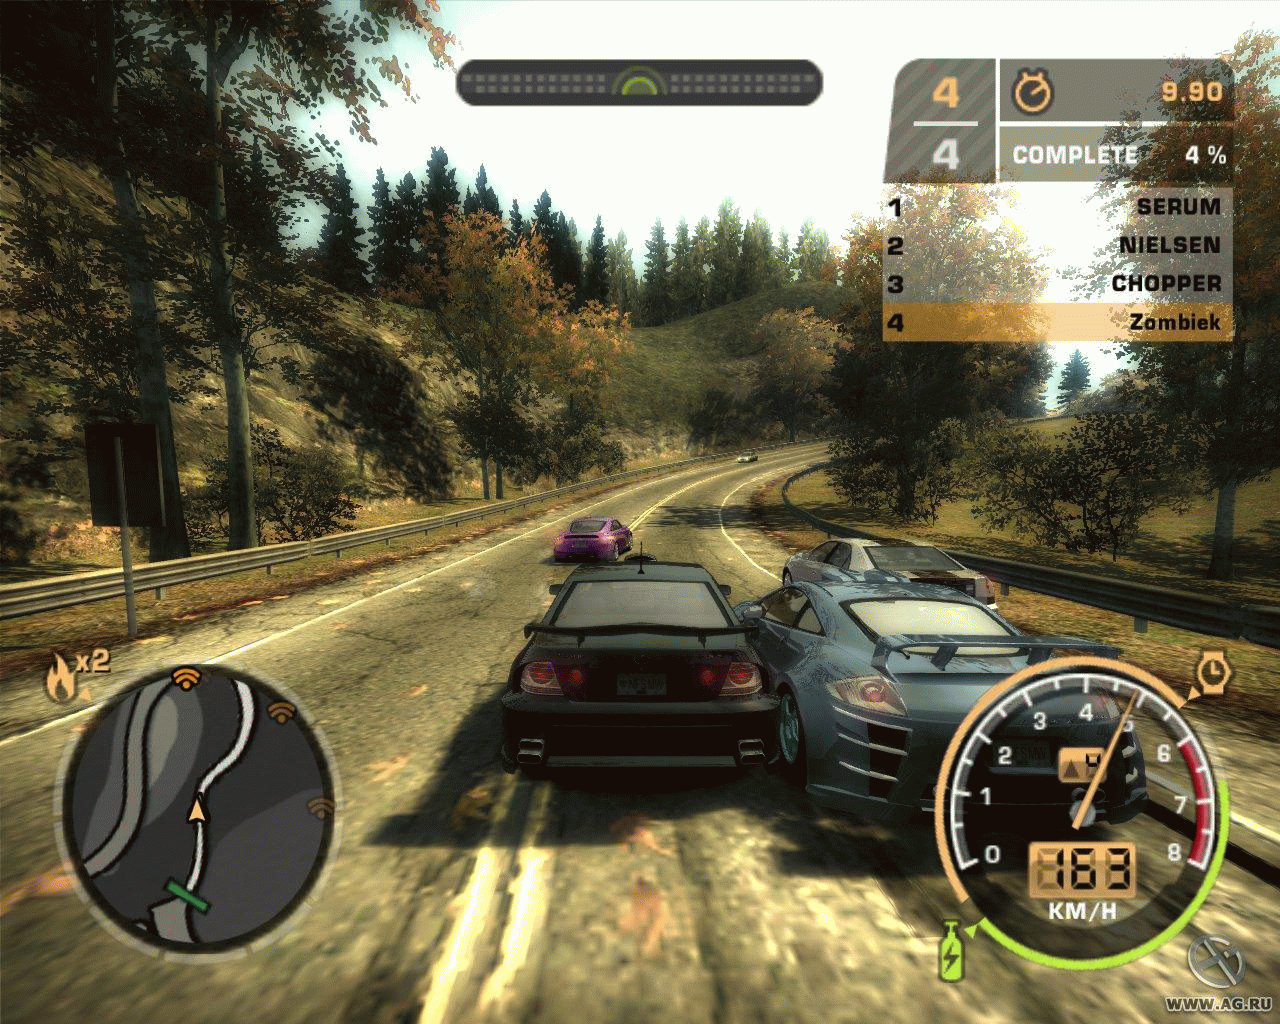 Need for speed wanted game. Игра NFS most wanted 2005. Гонки NFS most wanted Black Edition. NFS most wanted 2005 русская версия. NFS most wanted 2005 Black Edition.